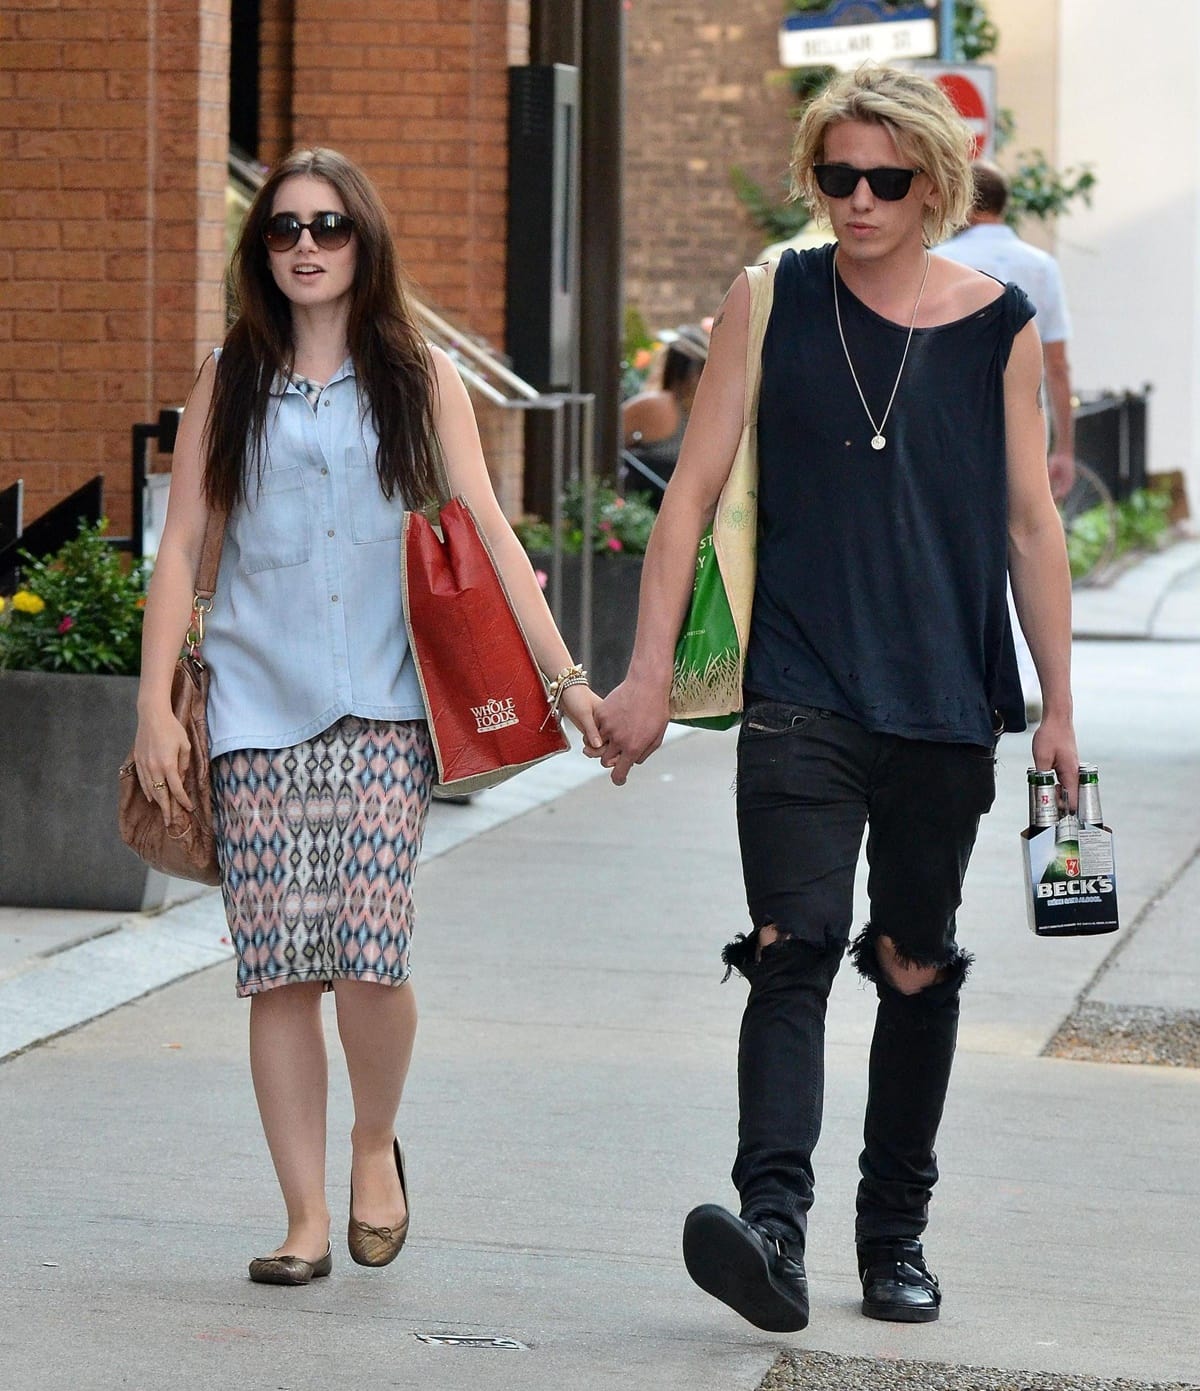 Lily Collins and Jamie Campbell Bower met in 2012 while filming The Mortals Instruments: City of Bones and announced their breakup in July 2013